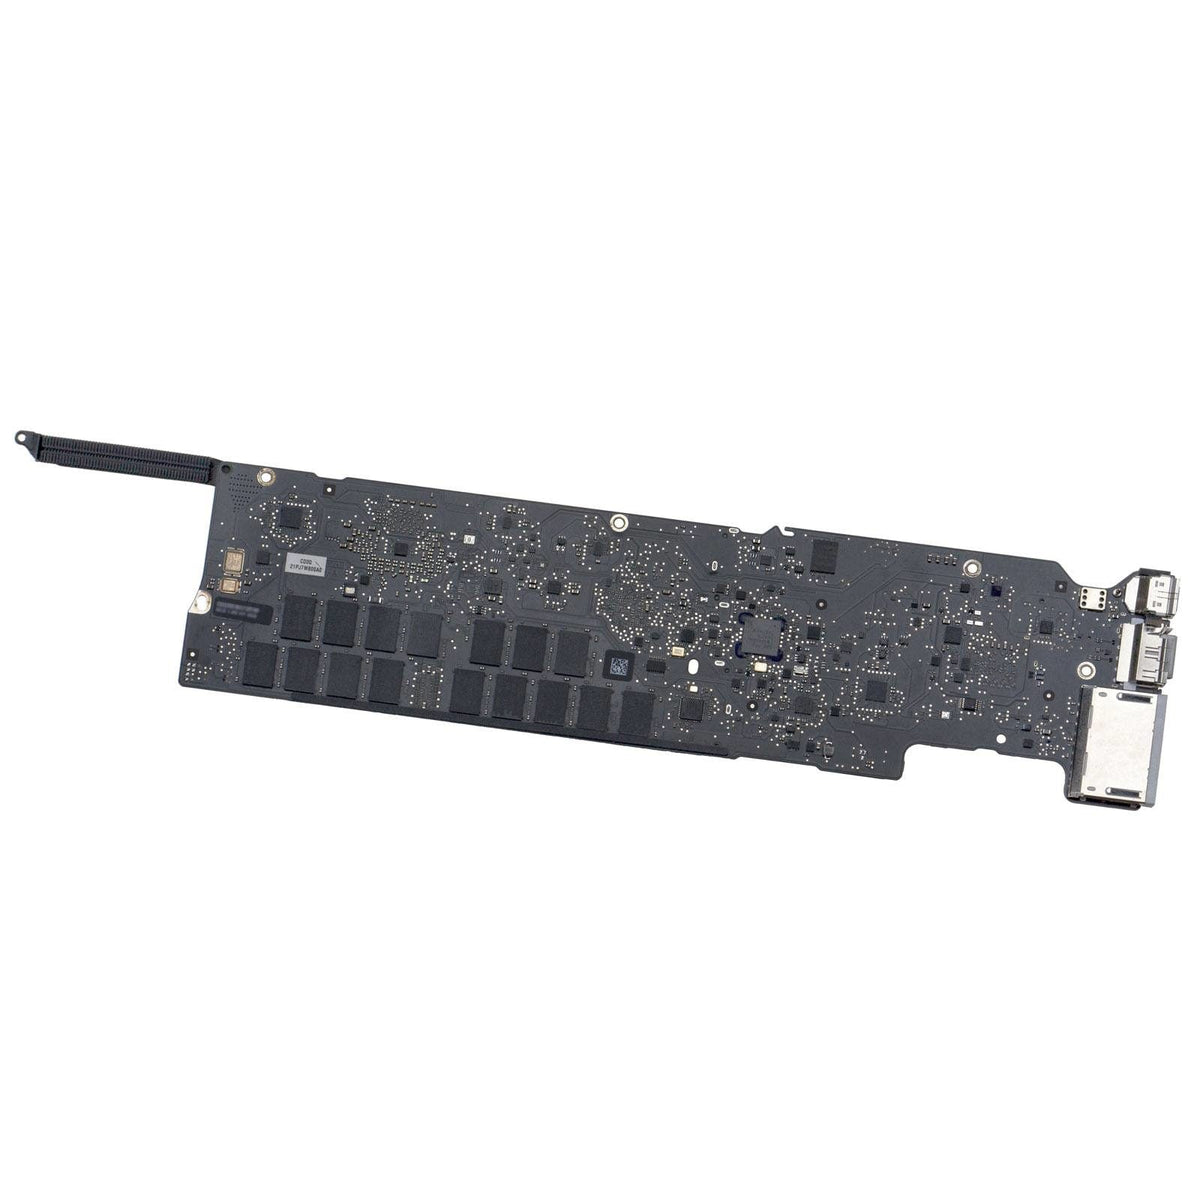 MOTHERBOARD FOR MACBOOK AIR 13" A1466 (MID 2012)